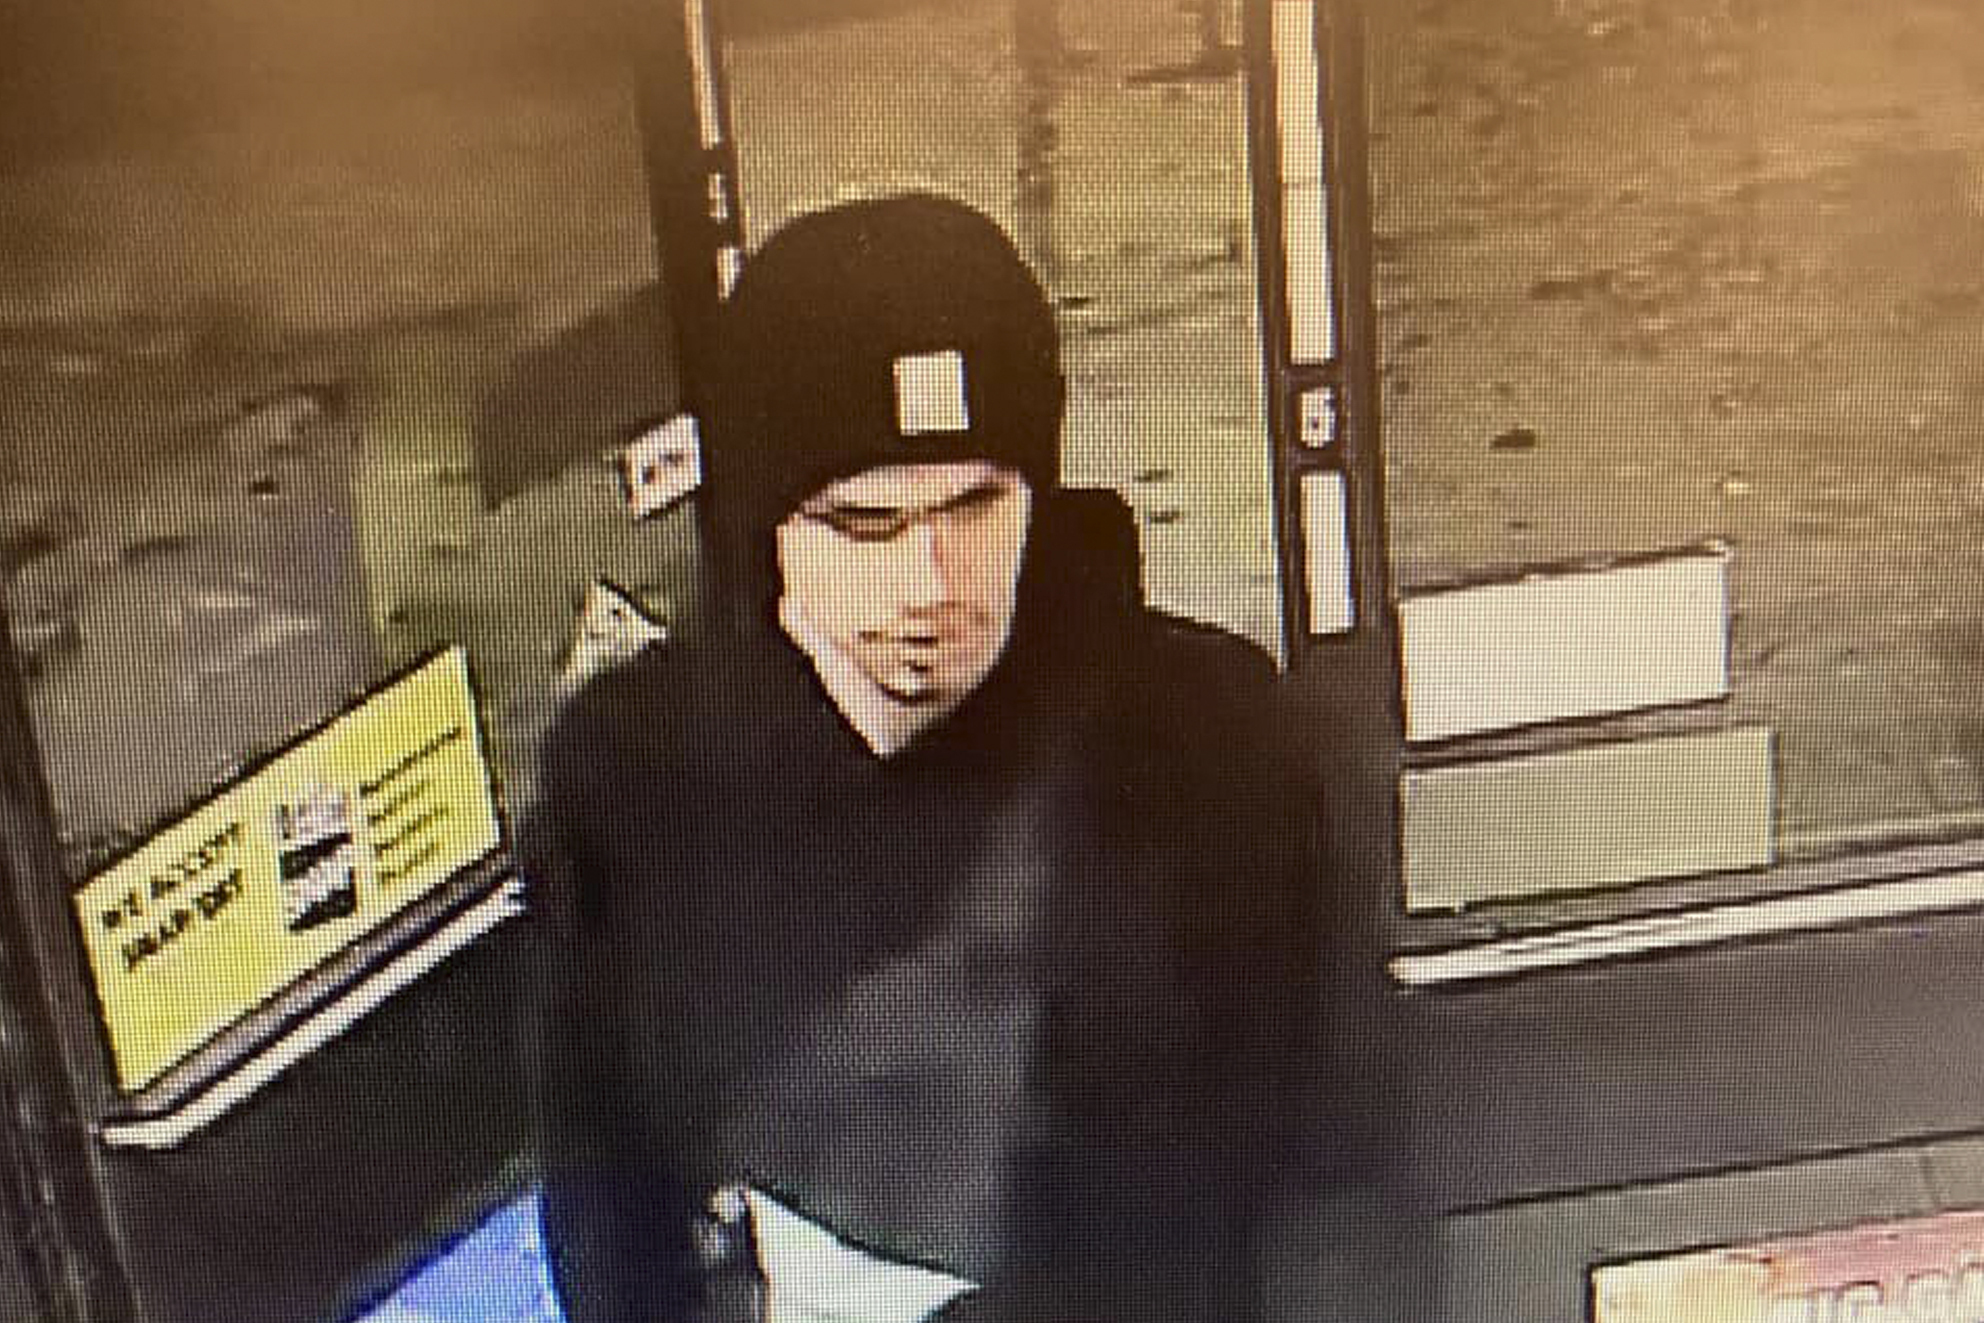 A suspect sought in a shooting at a convenience store in Yakima, Washington, is seen on surveillance footage early on Tuesday.